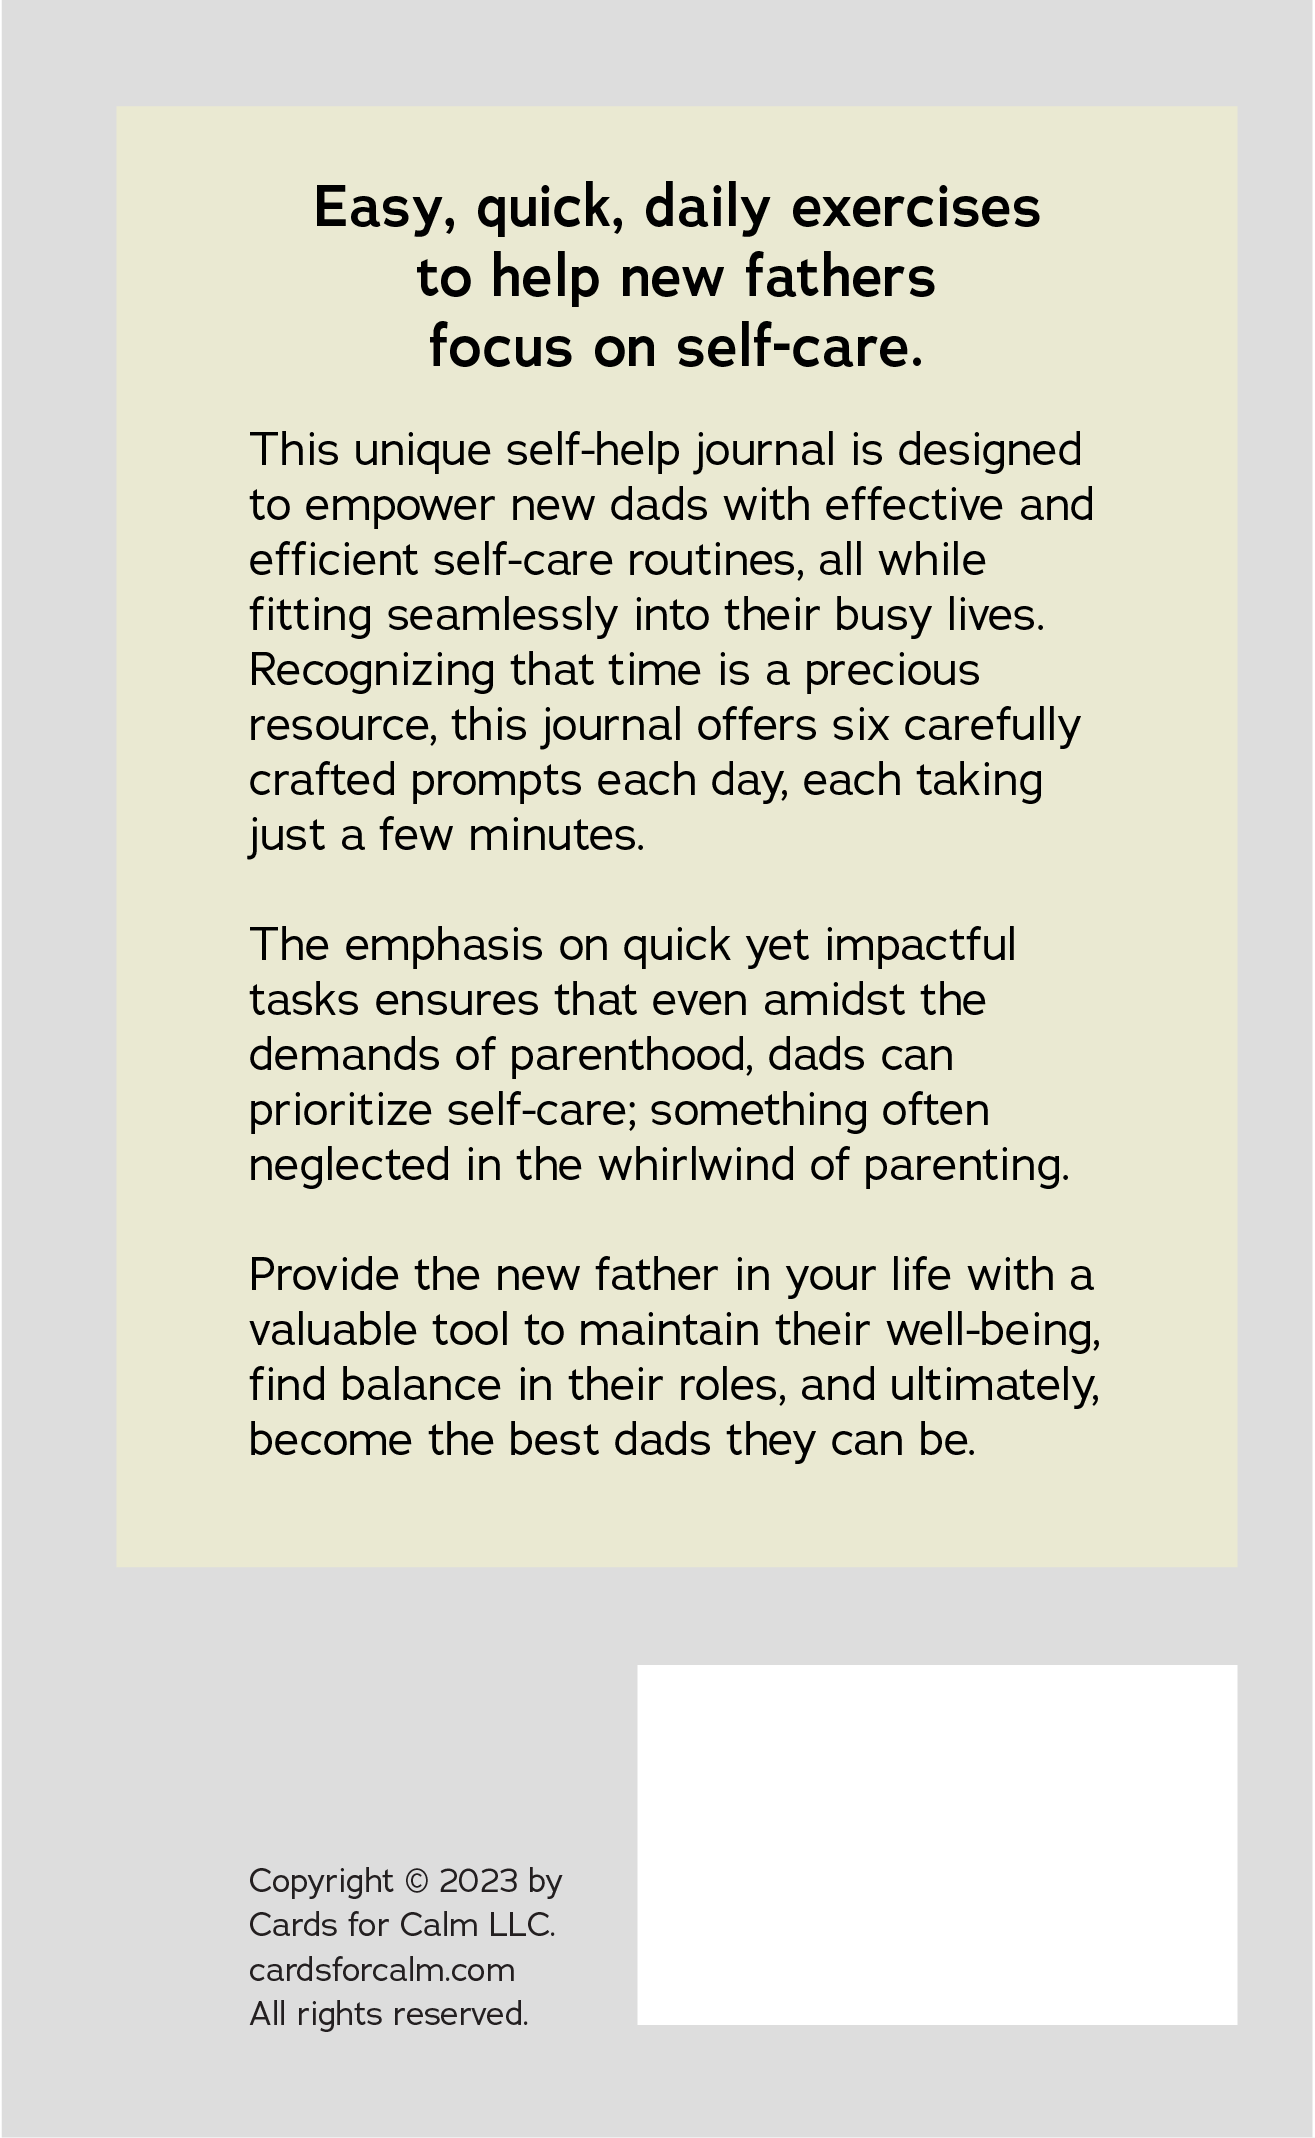 Daily Self-Care For Dads: Easy, quick exercises that empower new fathers to balance parenting with self-care.